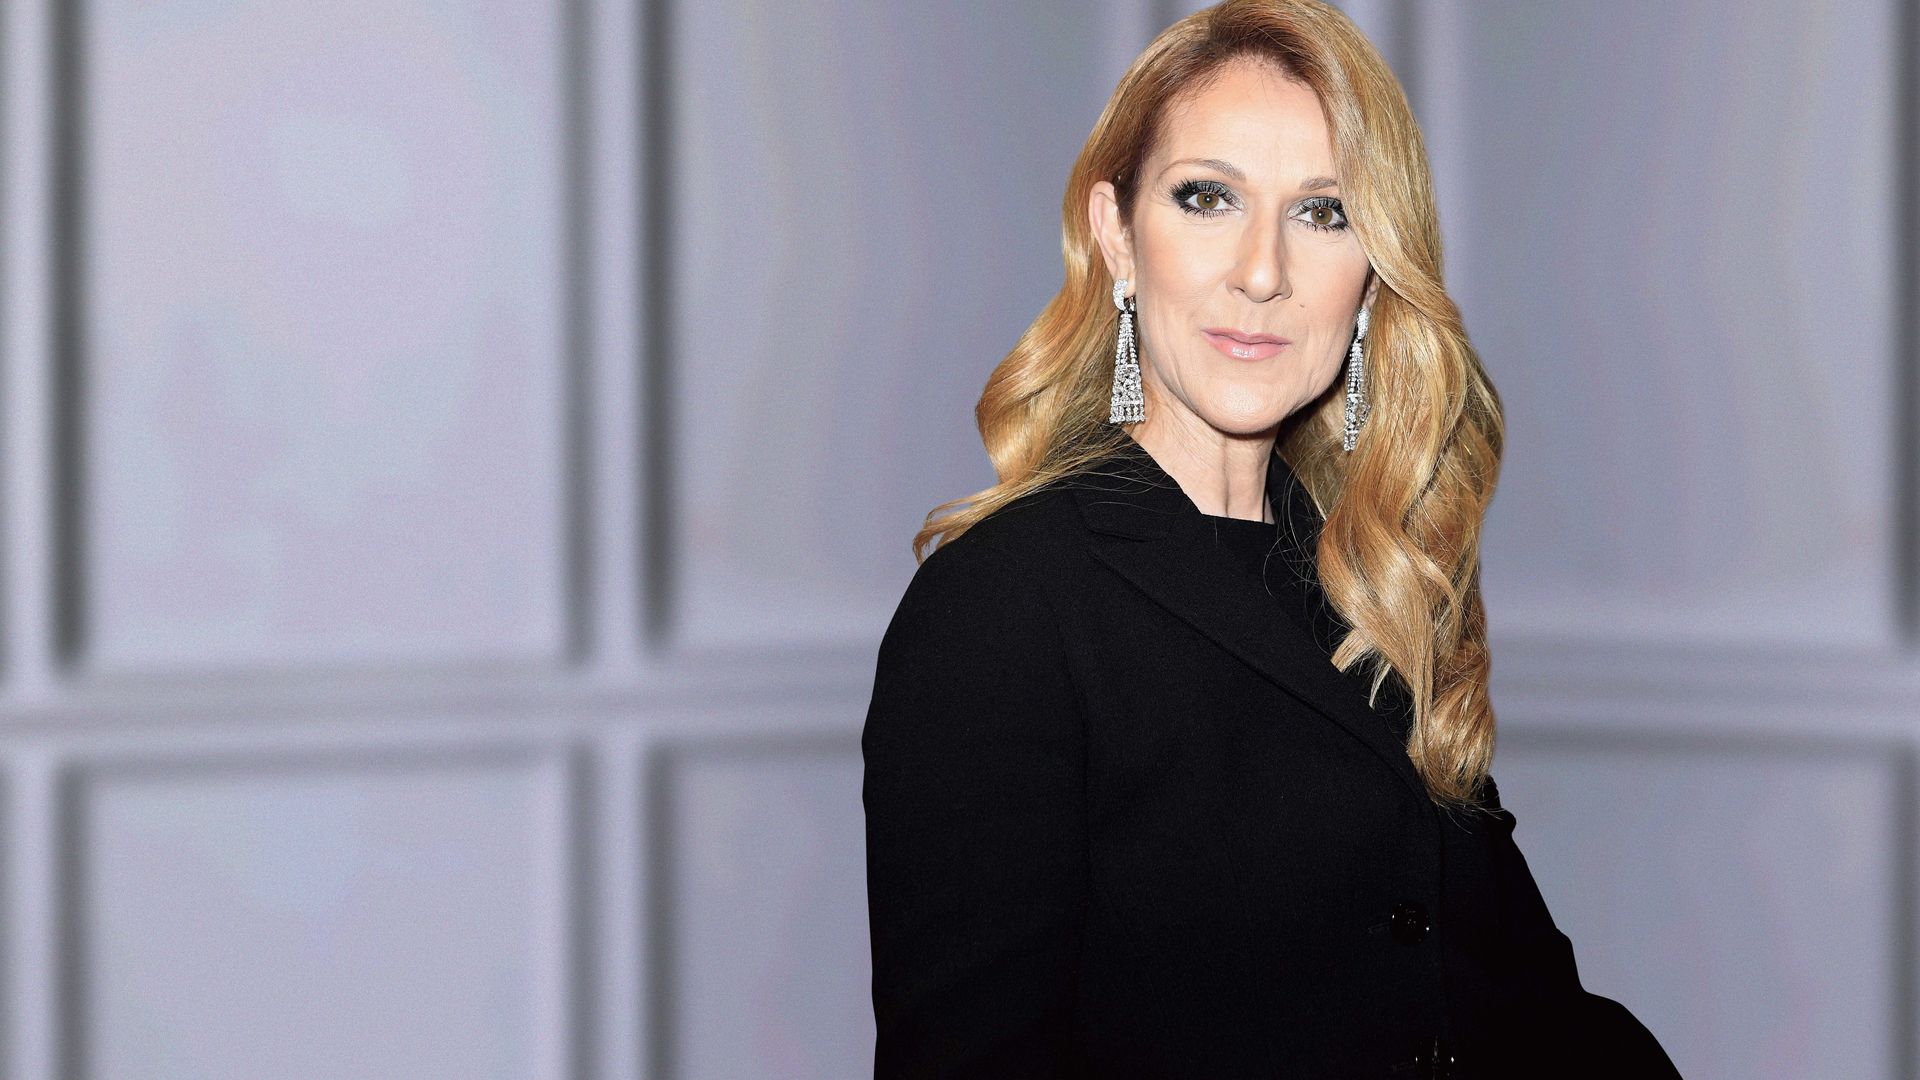 Celine's family and fans are wishing for her recovery